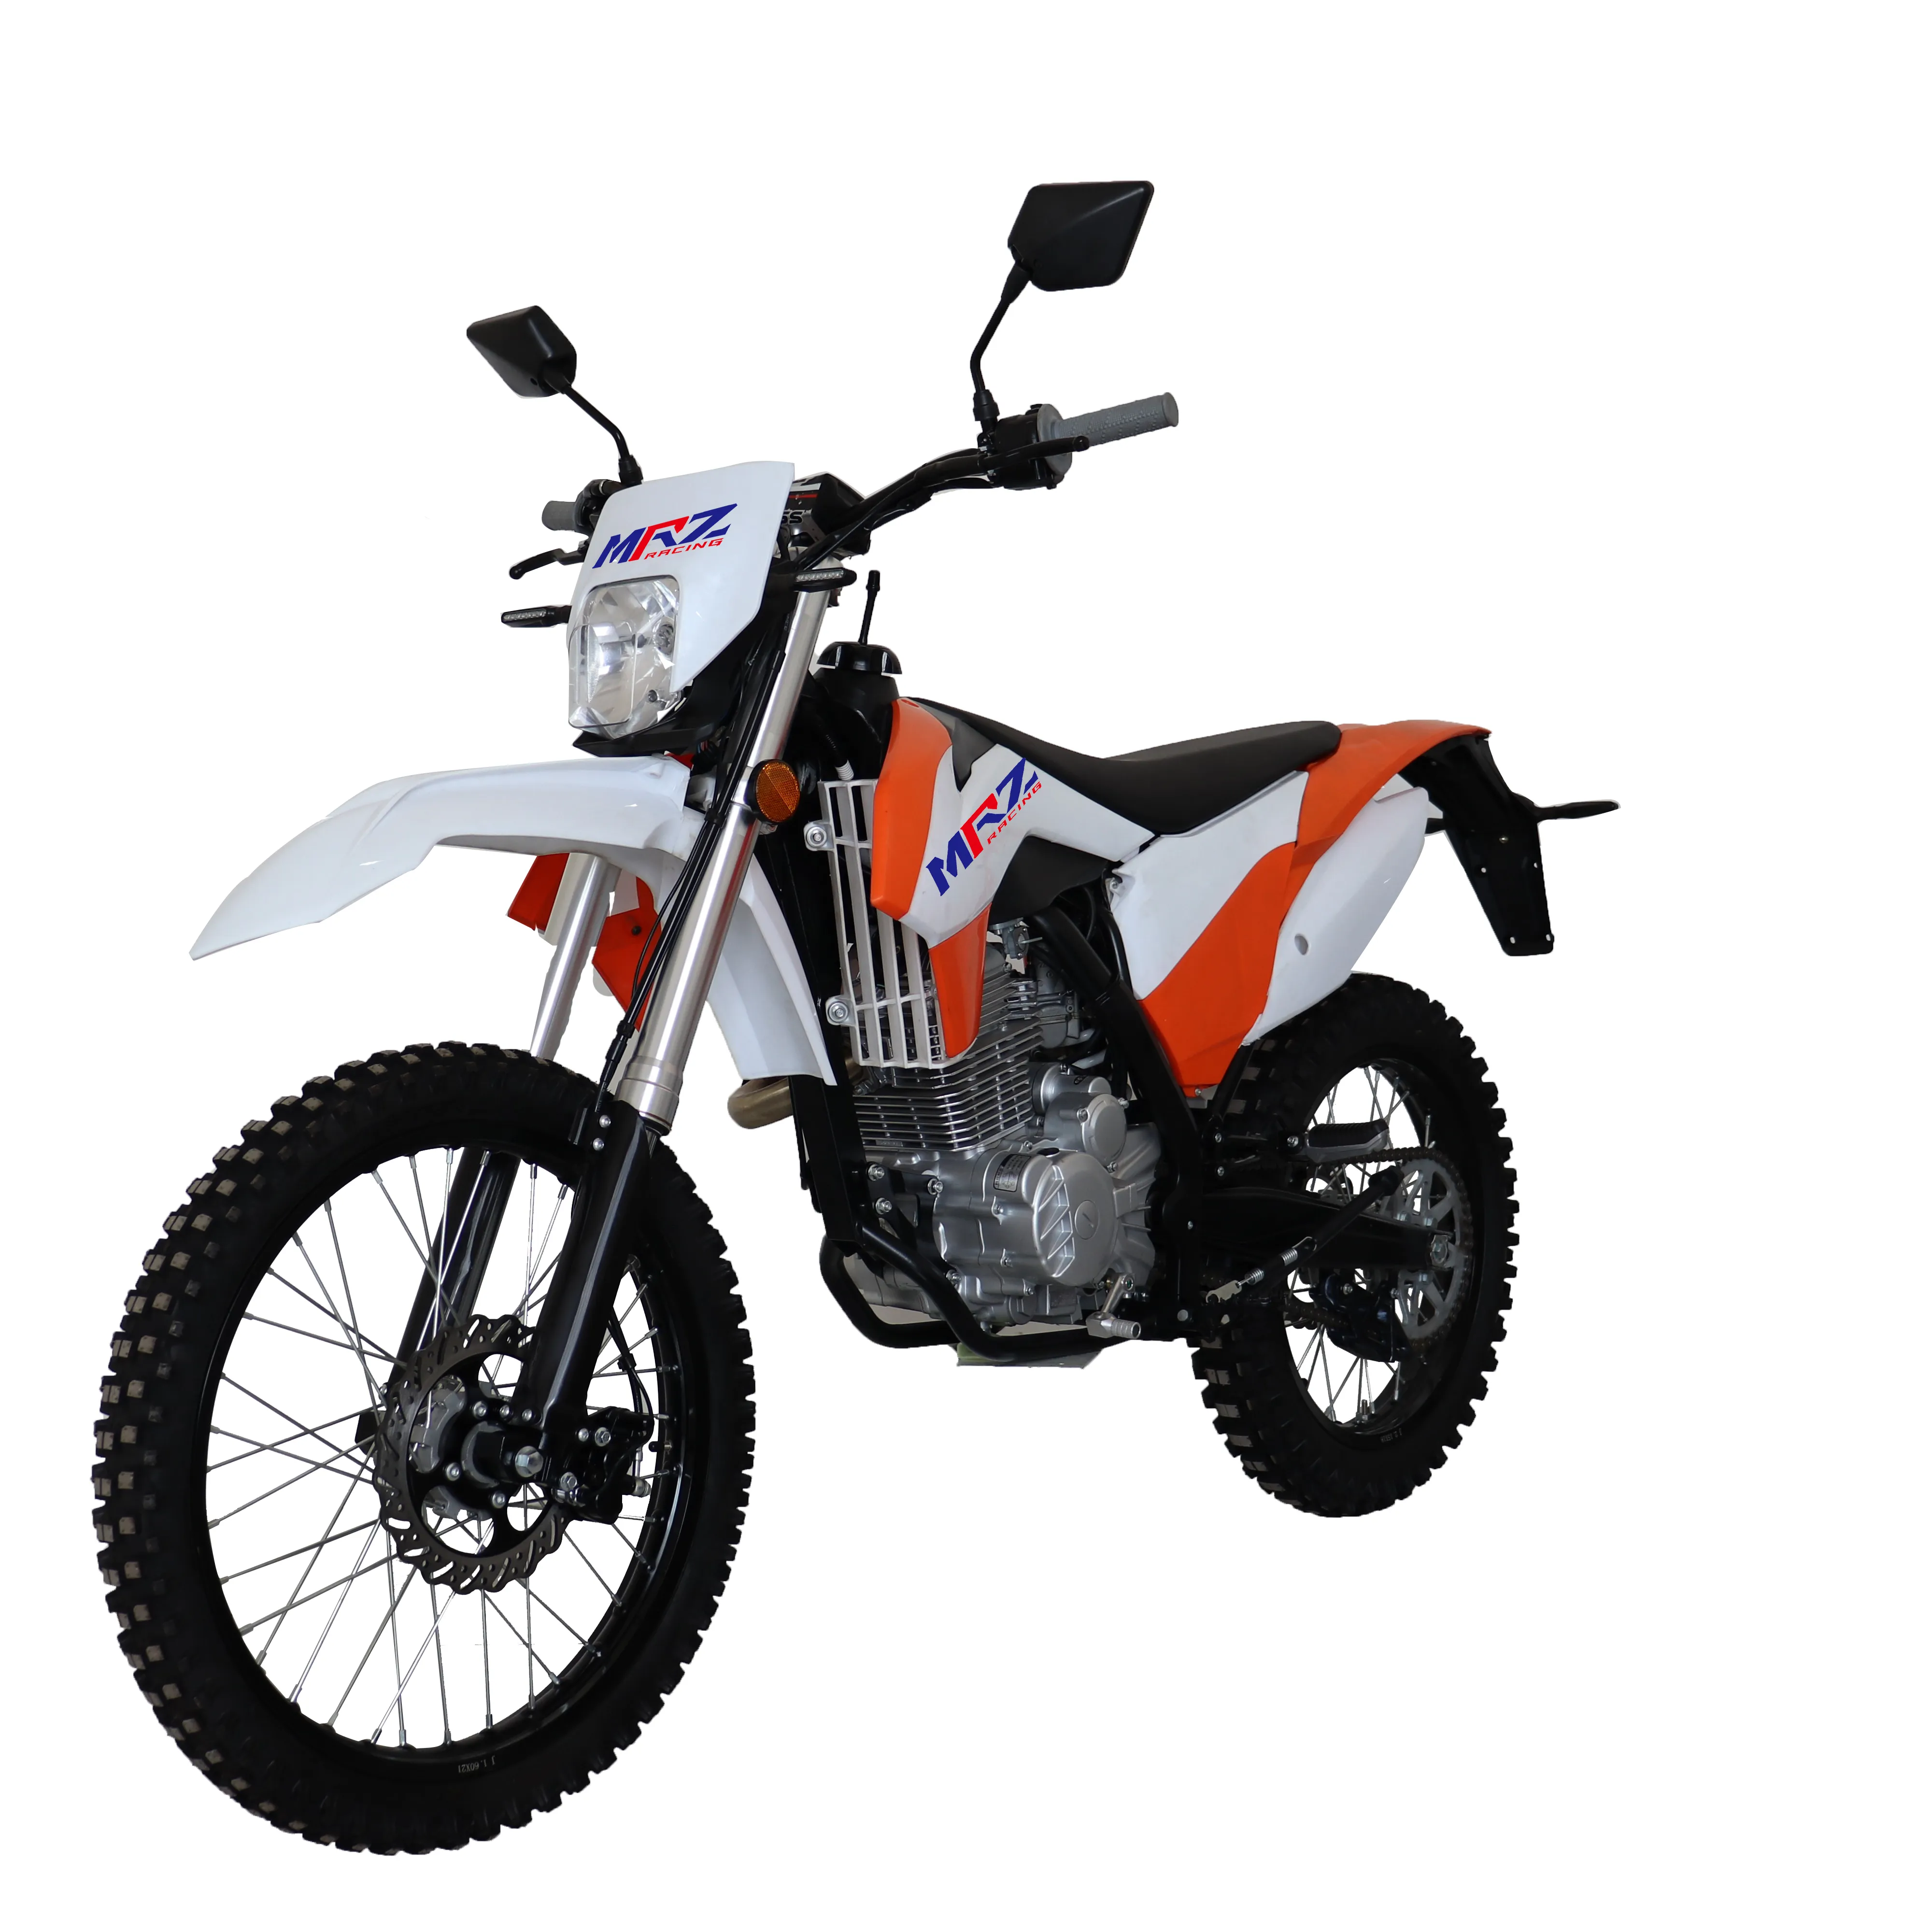 new automatic gas moto cross dirtbike motor trail dirt bike KTM 250cc gasoline motocross offroad motorcycle with zongshen engine